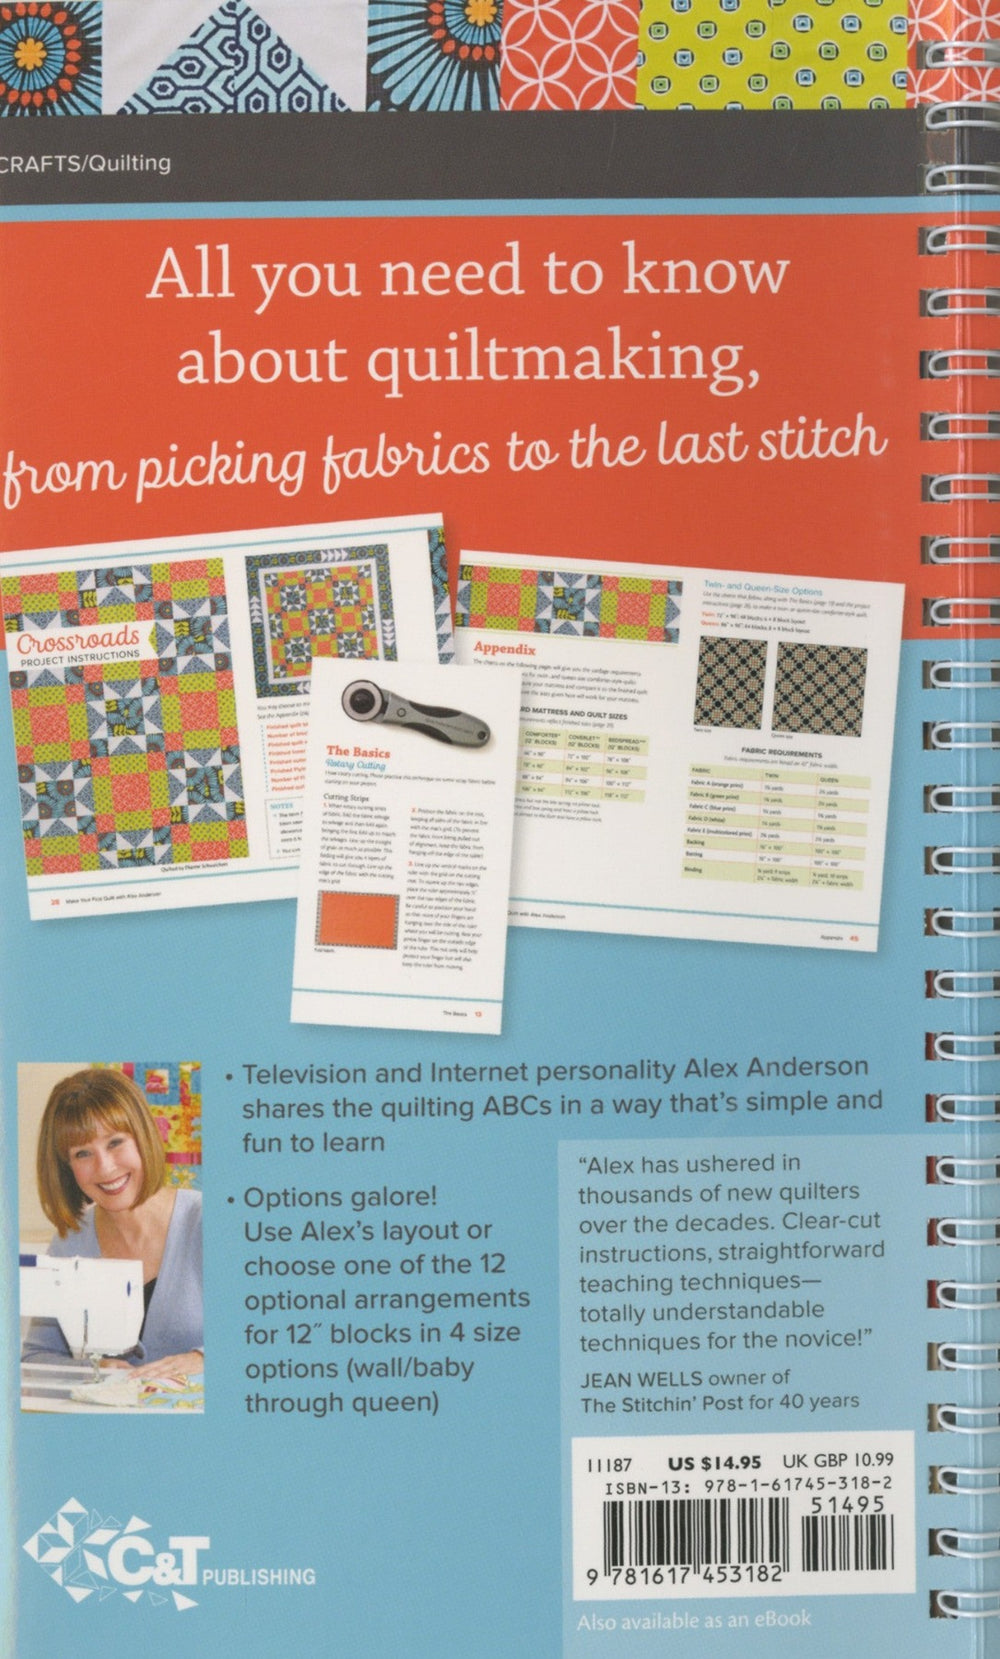 Make Your First Quilt with Alex Anderson (417273118760)